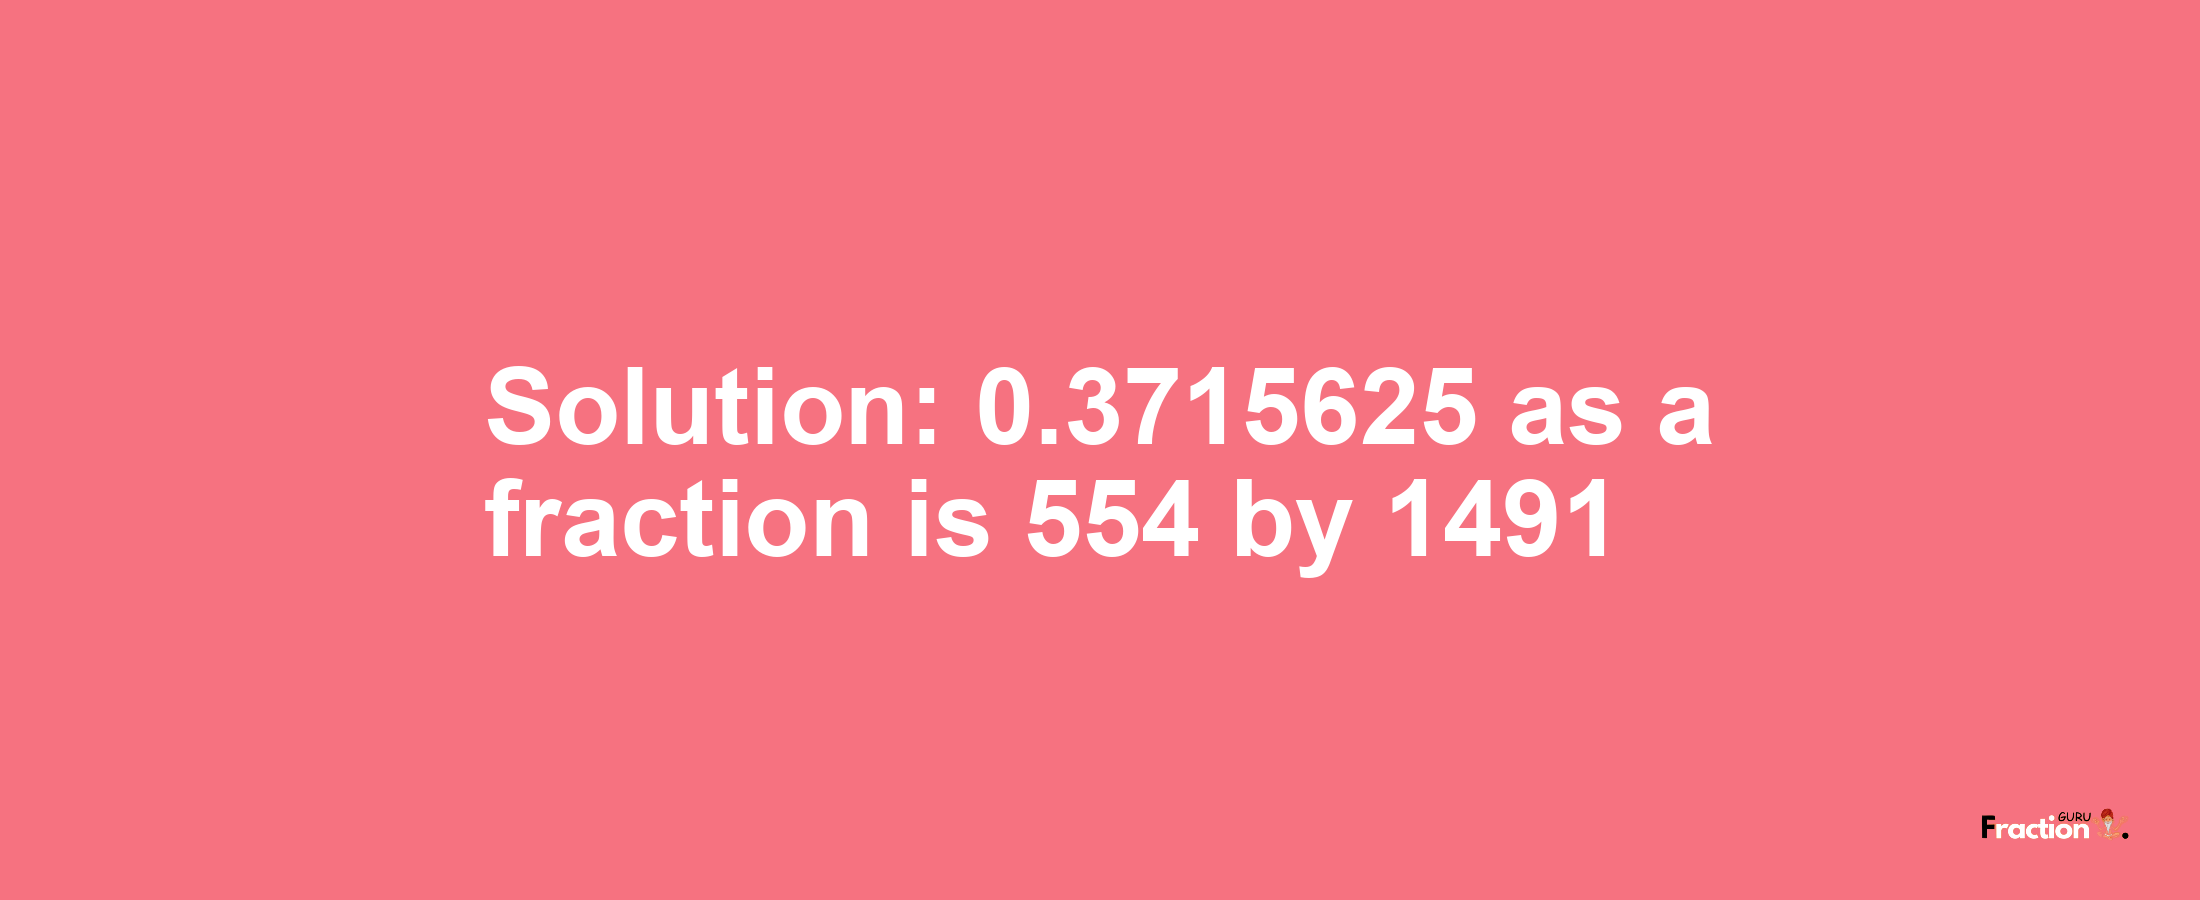 Solution:0.3715625 as a fraction is 554/1491